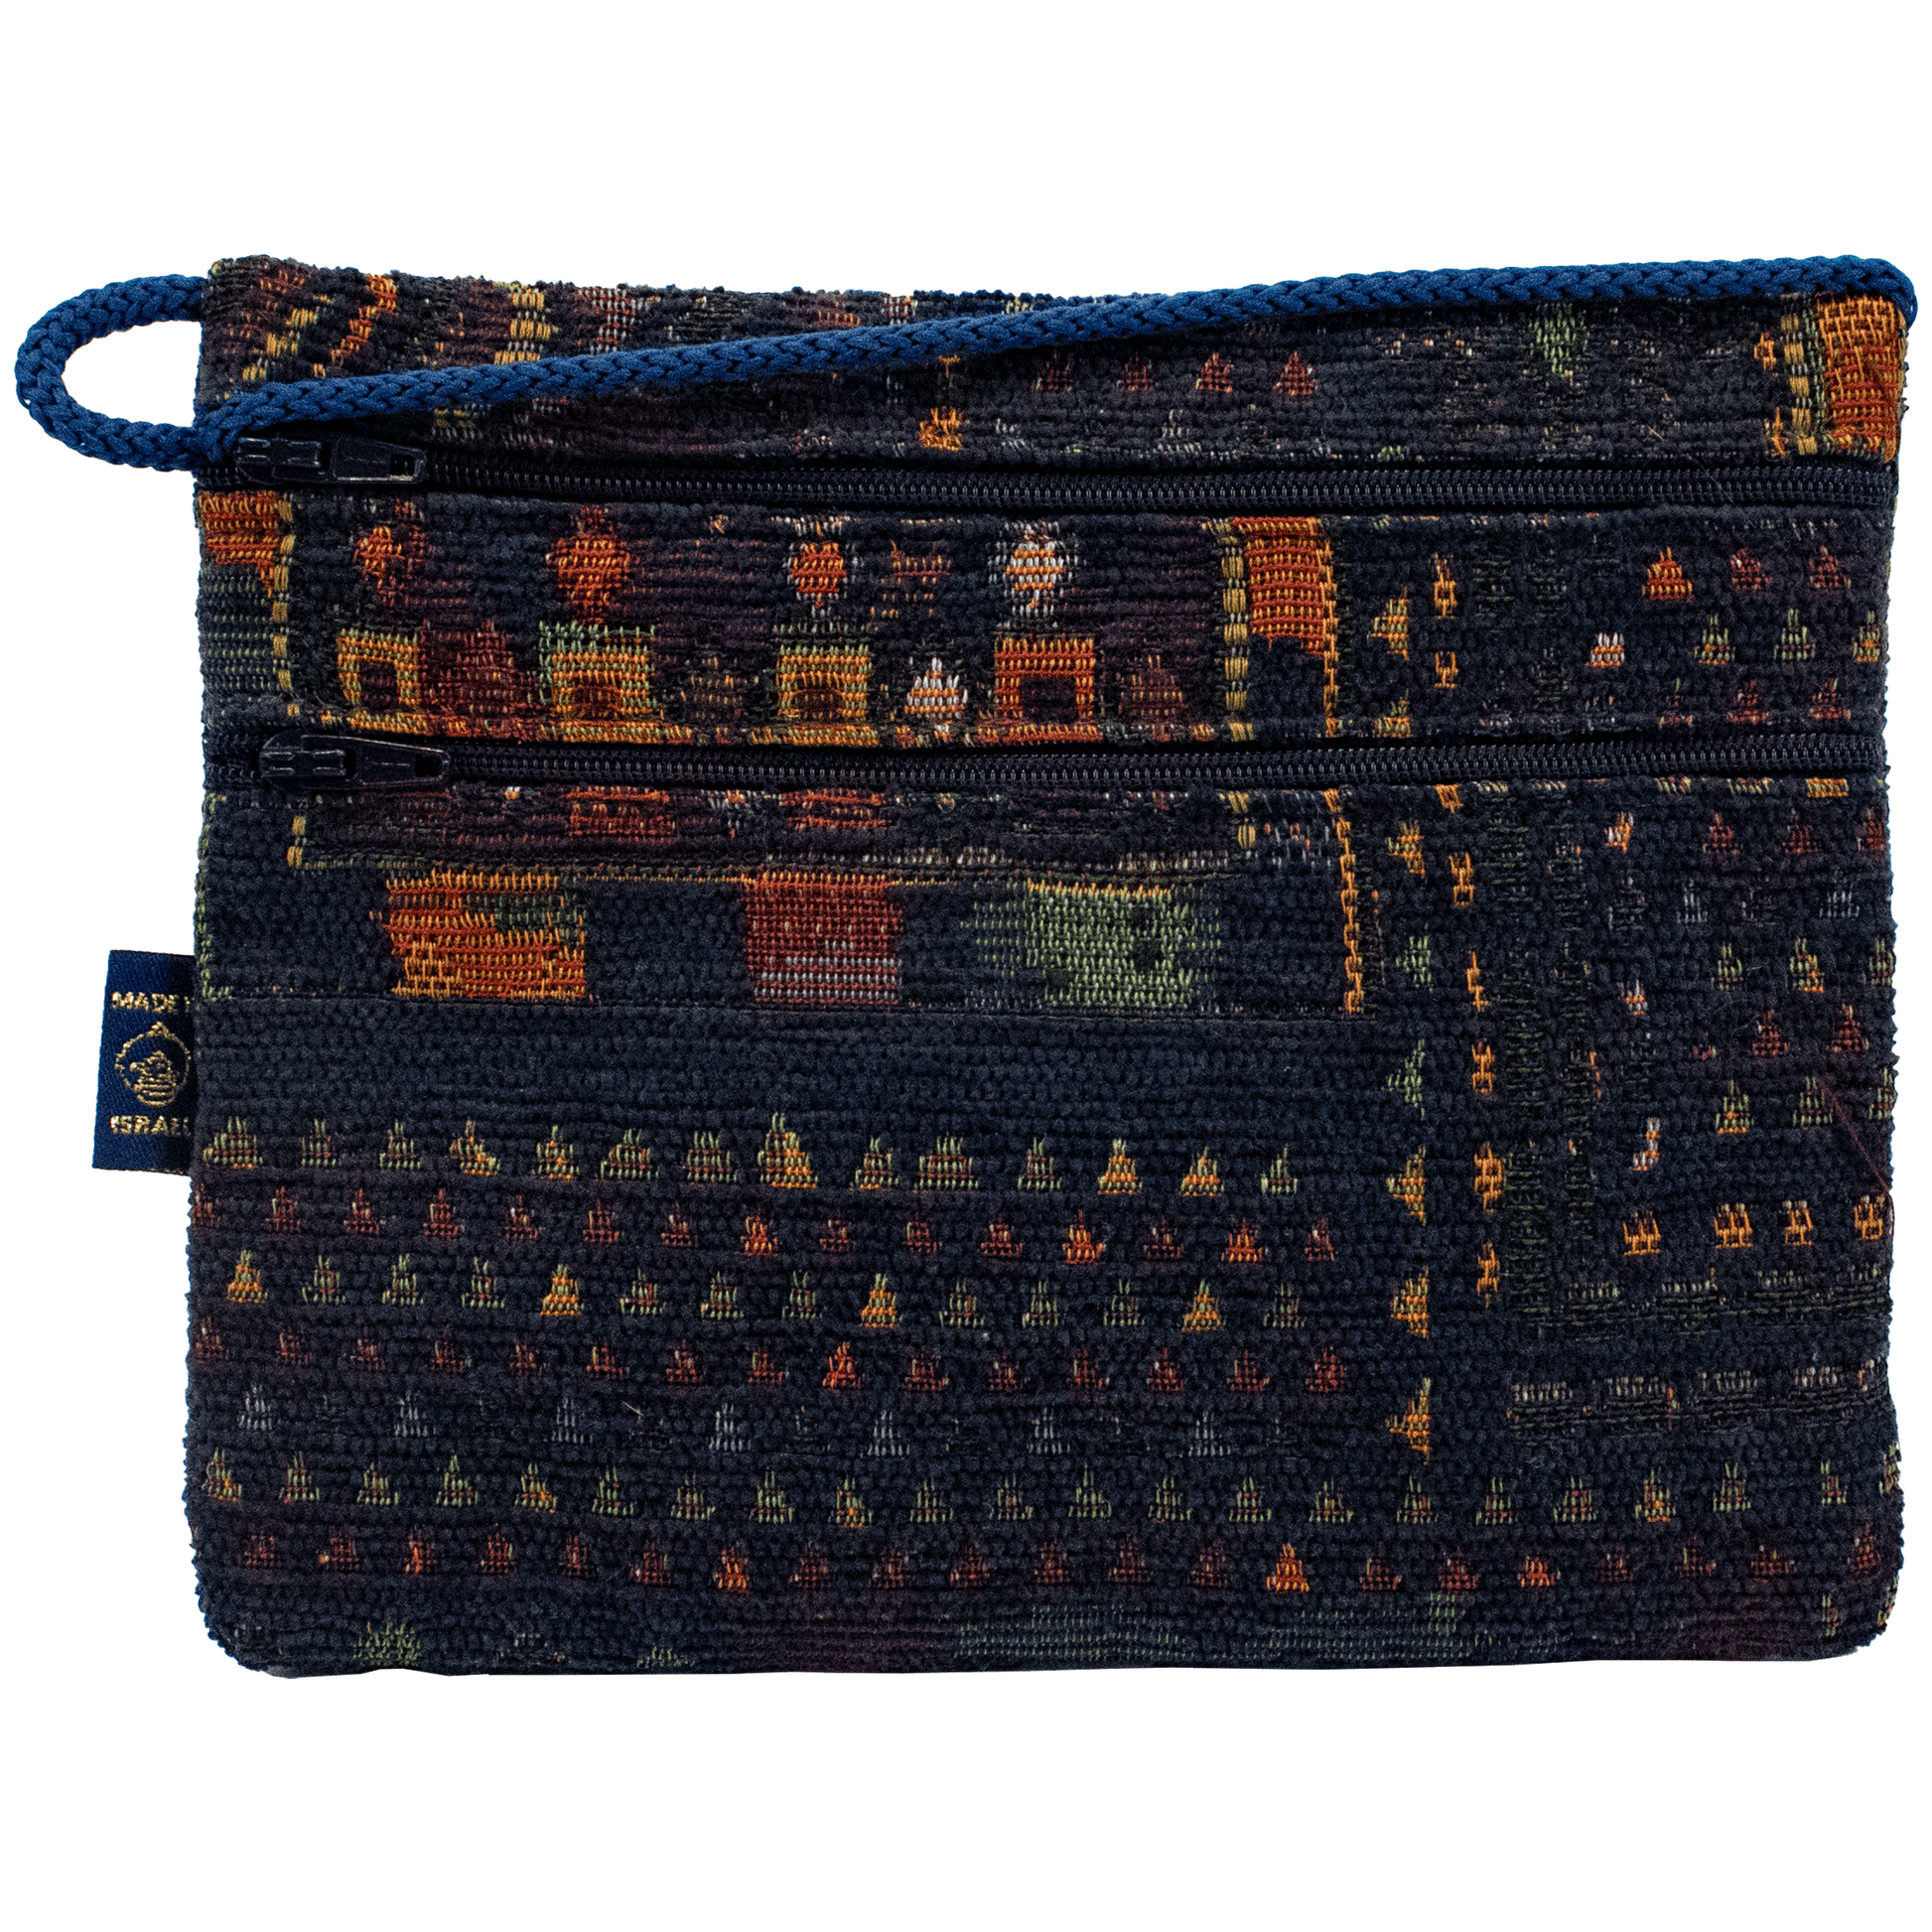 Double zipper horizontal crossbody bag with Geometric pattern Navy Blue and earthy tones